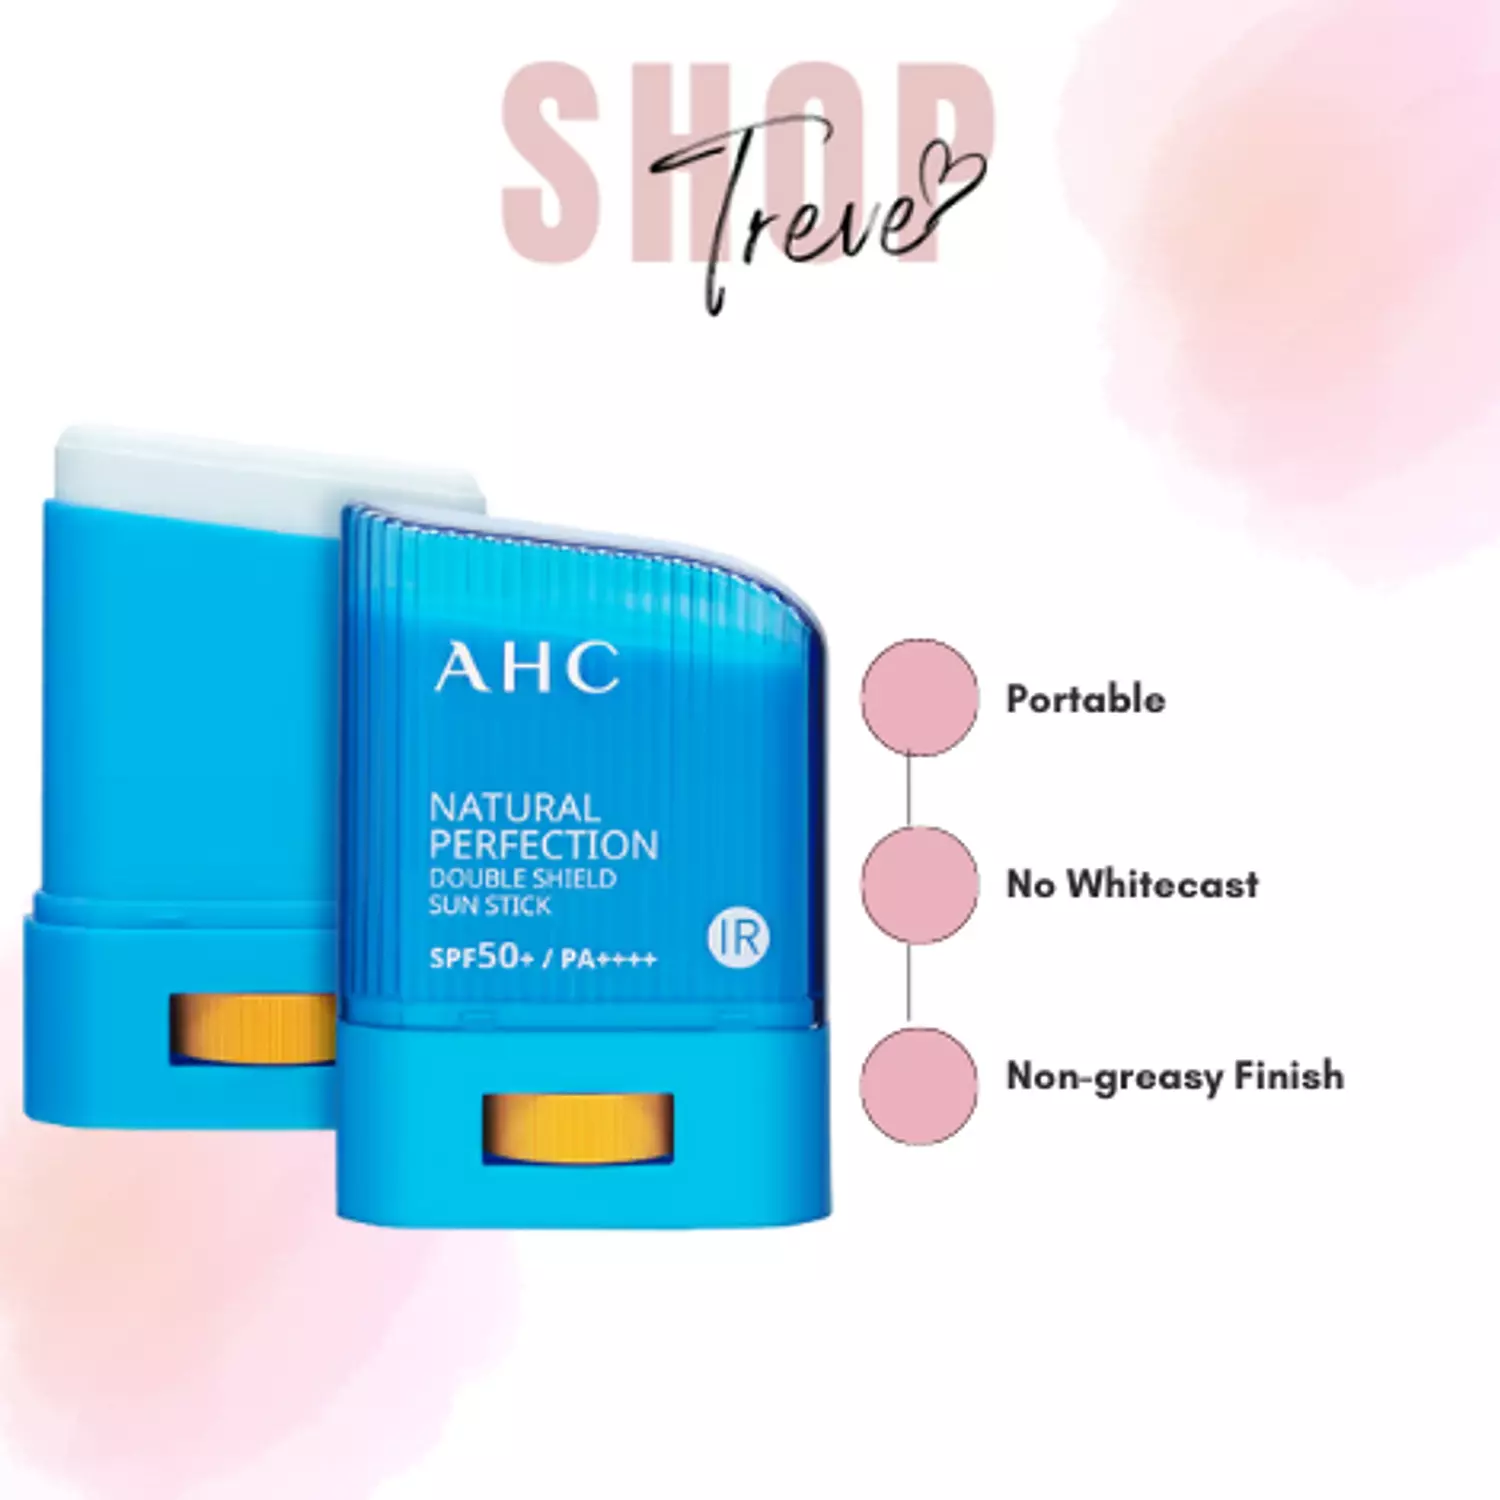 AHC - Natural Protection Double Shield Sunstick hover image